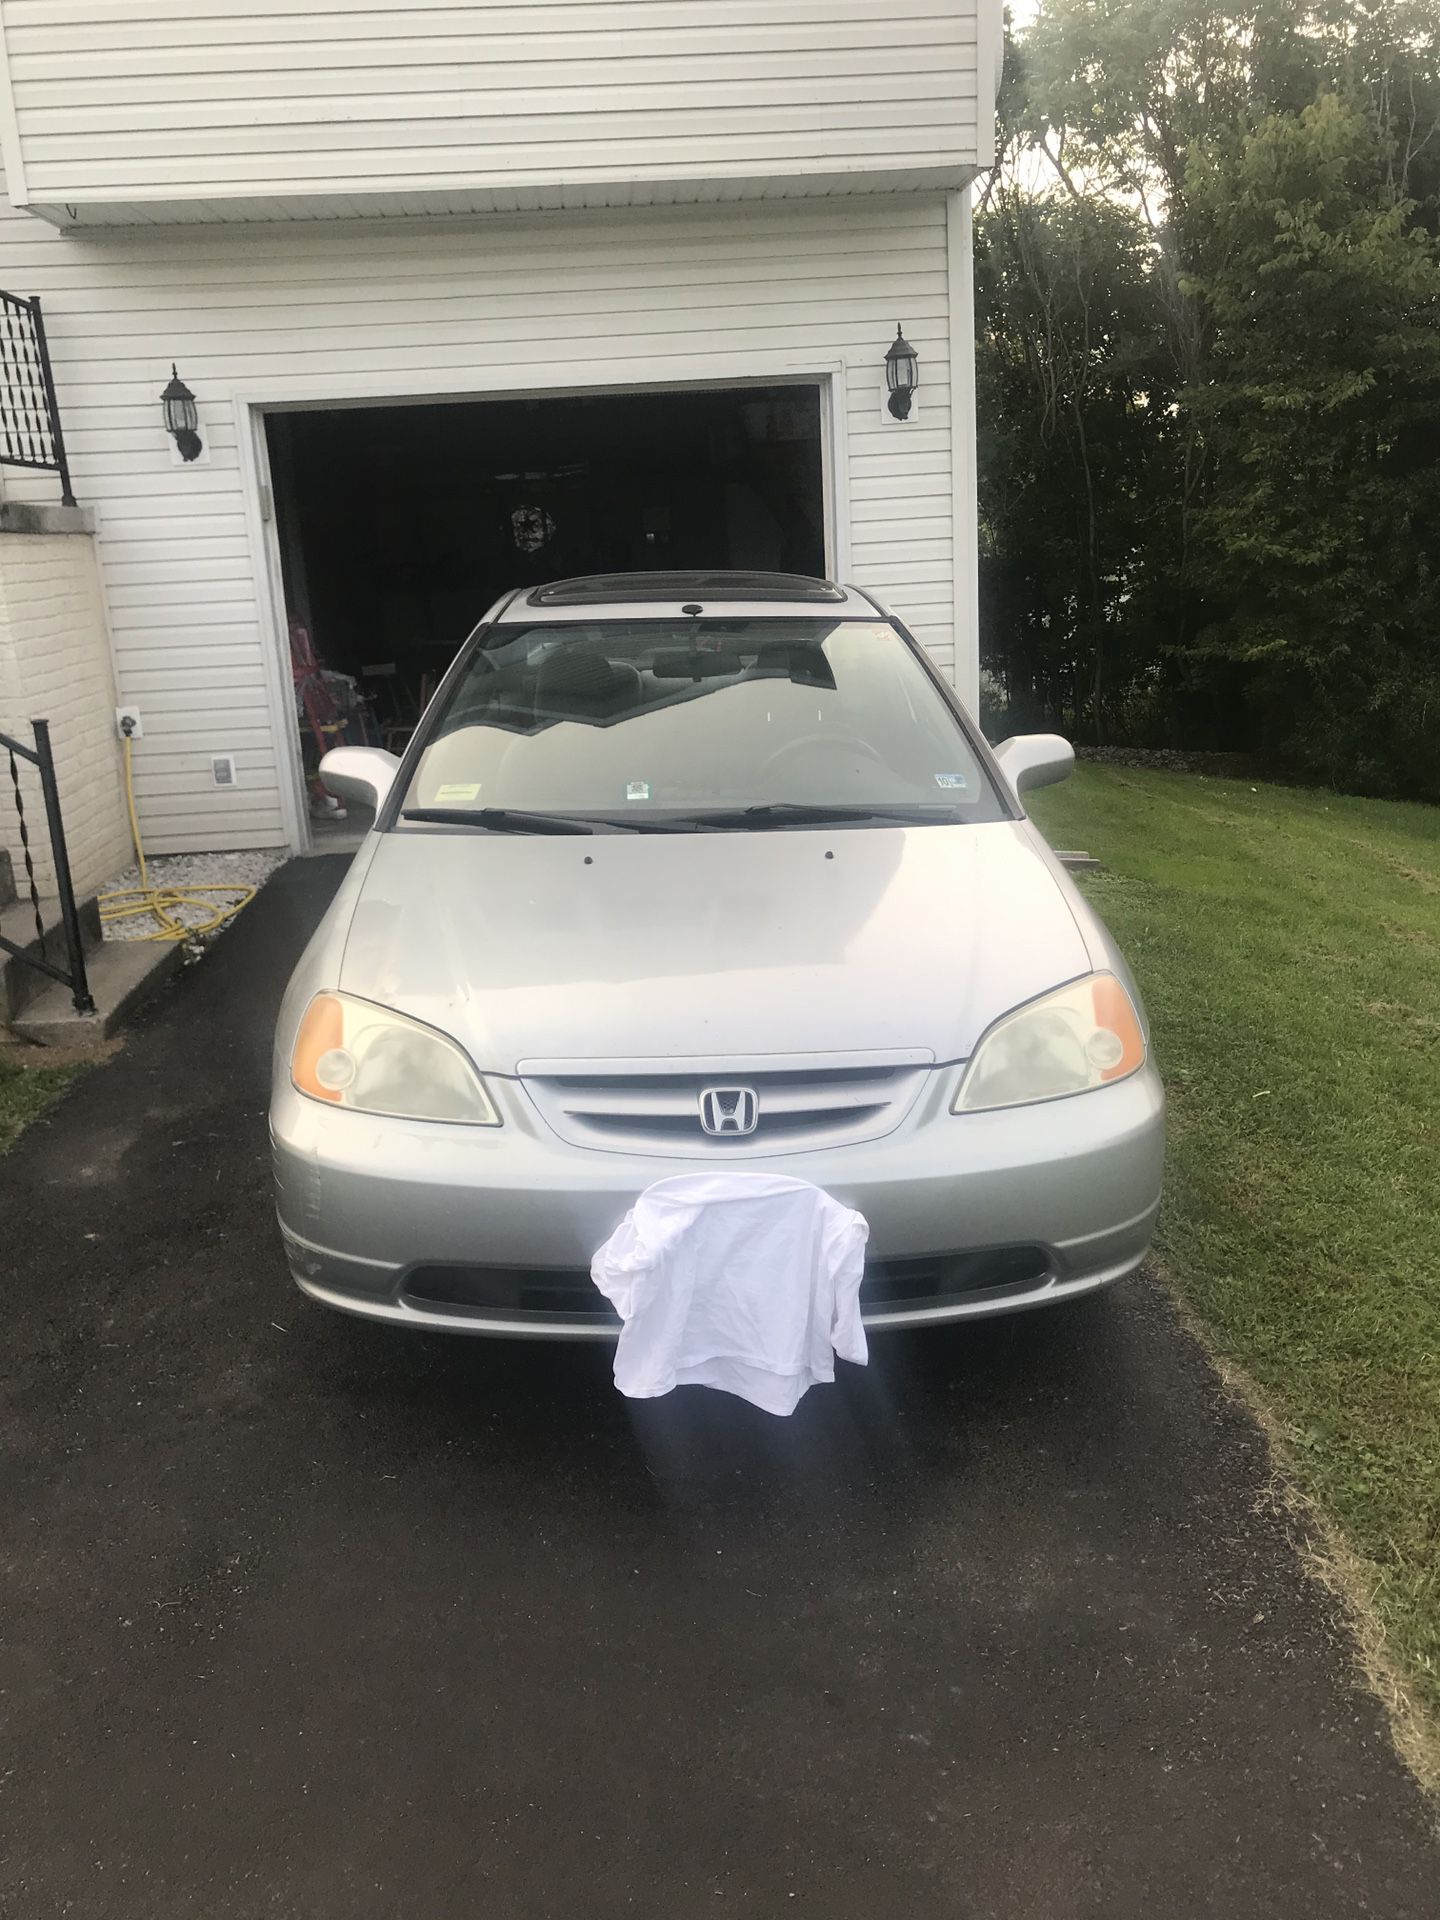 2001 Honda Civic EX 2 Door Coupe With Sunroof ! 210,000 miles ! Ac runs cold , tires in good shape, but car does overheat sometimes. Easy fix for Hon